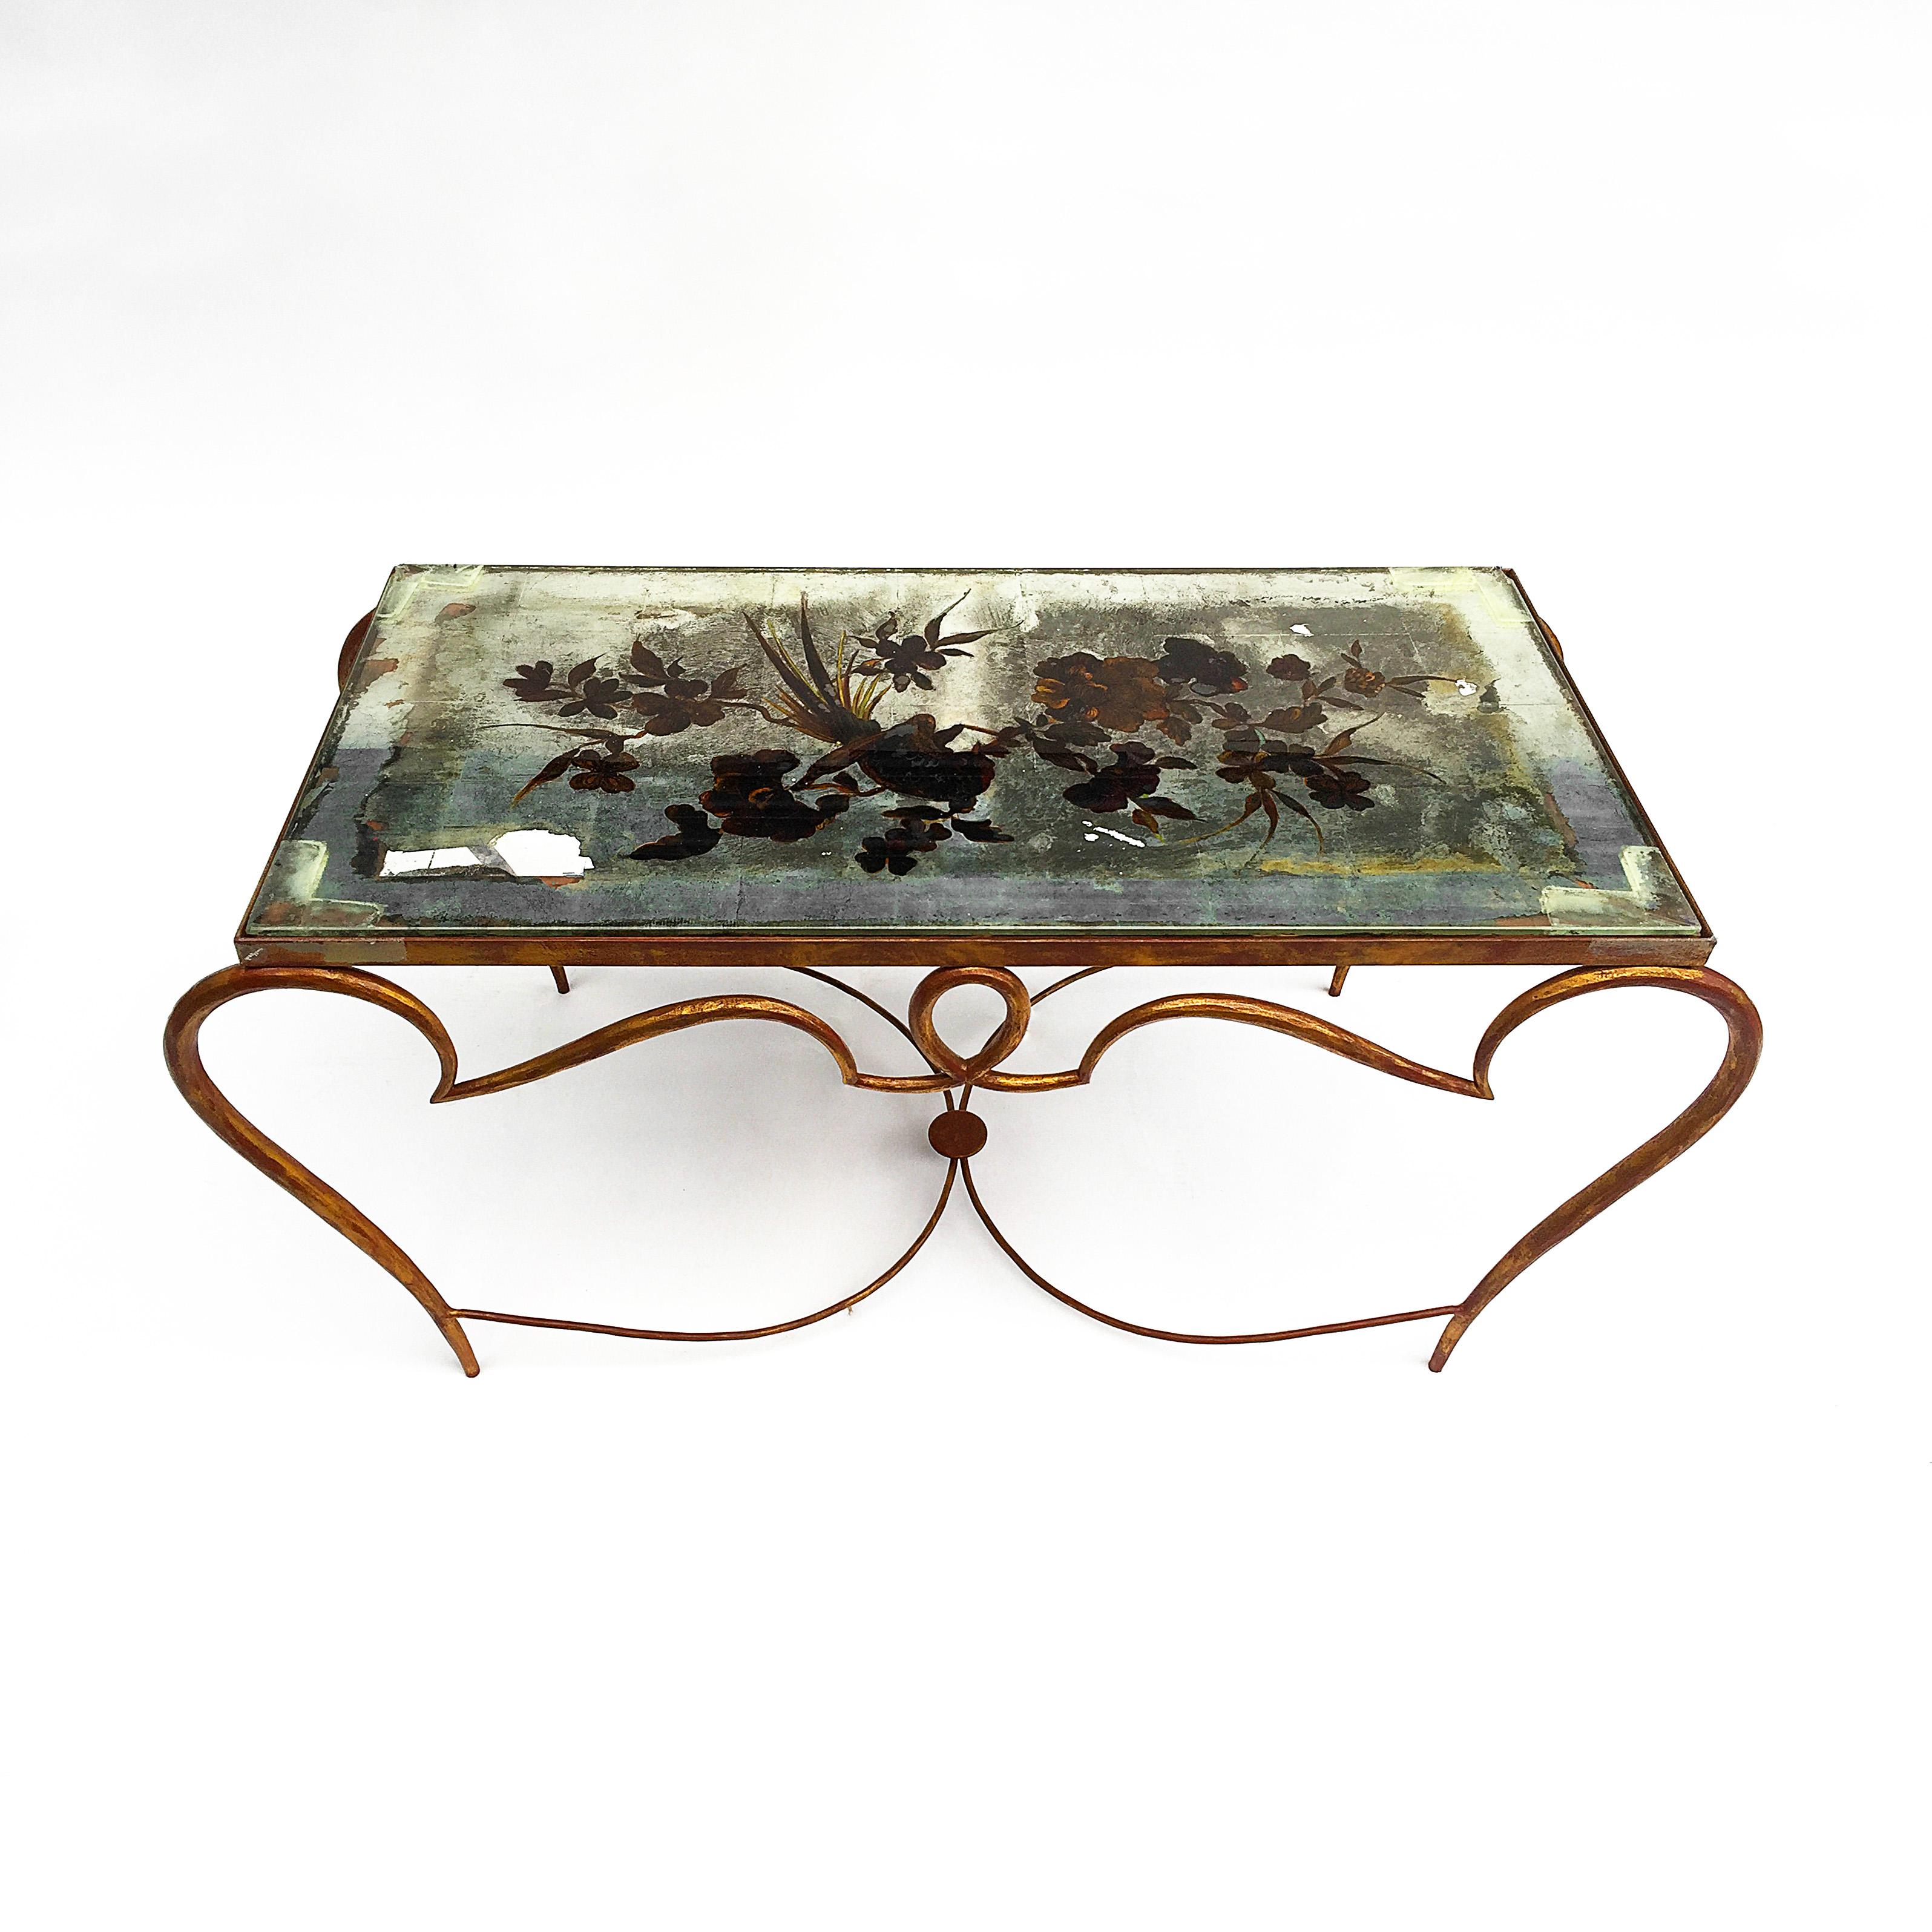 Forged Rene Drouet Silver Gilded églomisé Coffee Cocktail Table Art Deco French 1940s For Sale